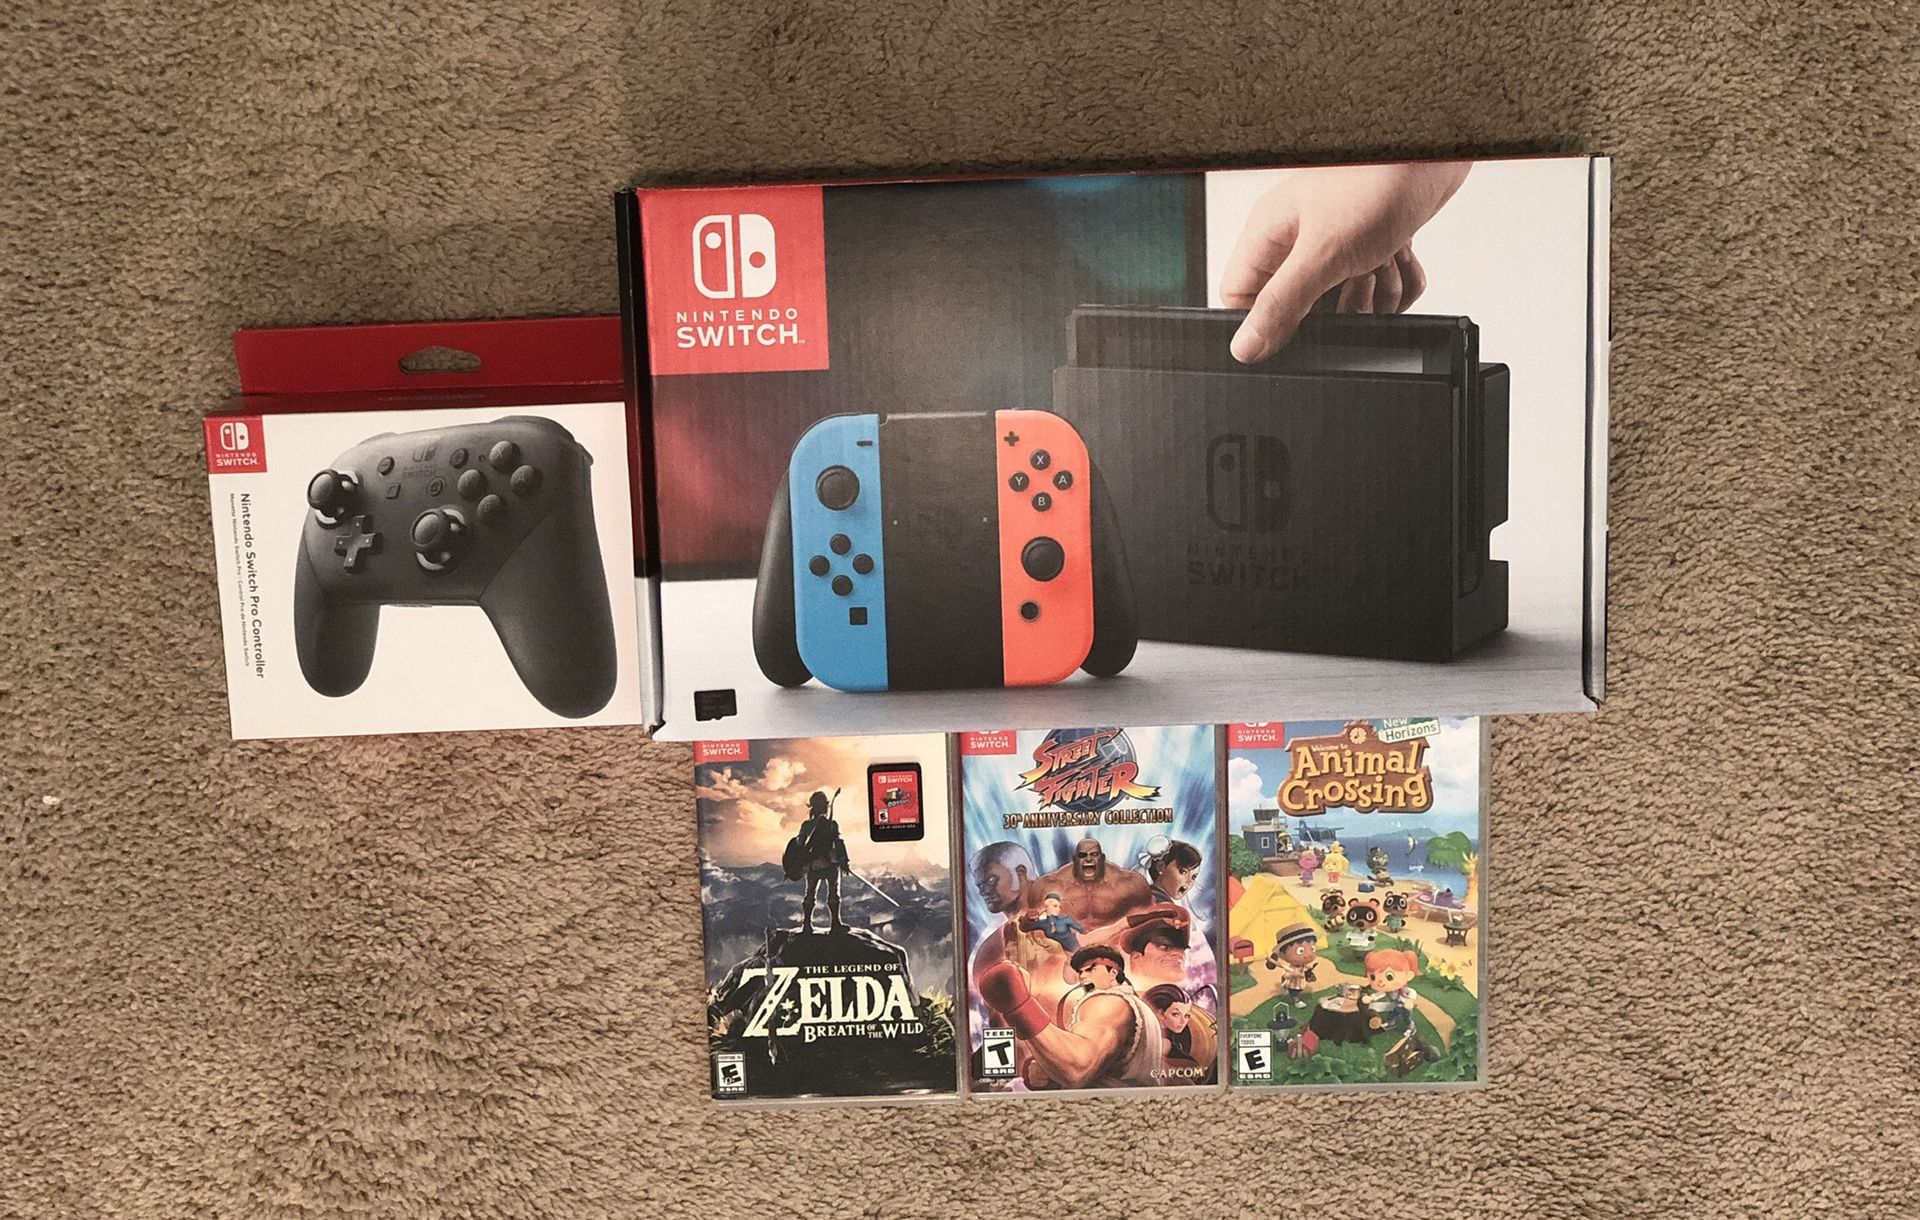 Nintendo Switch + 4 Big Games + Pro controller + FREE 128GB SD CARD and Carrying Case